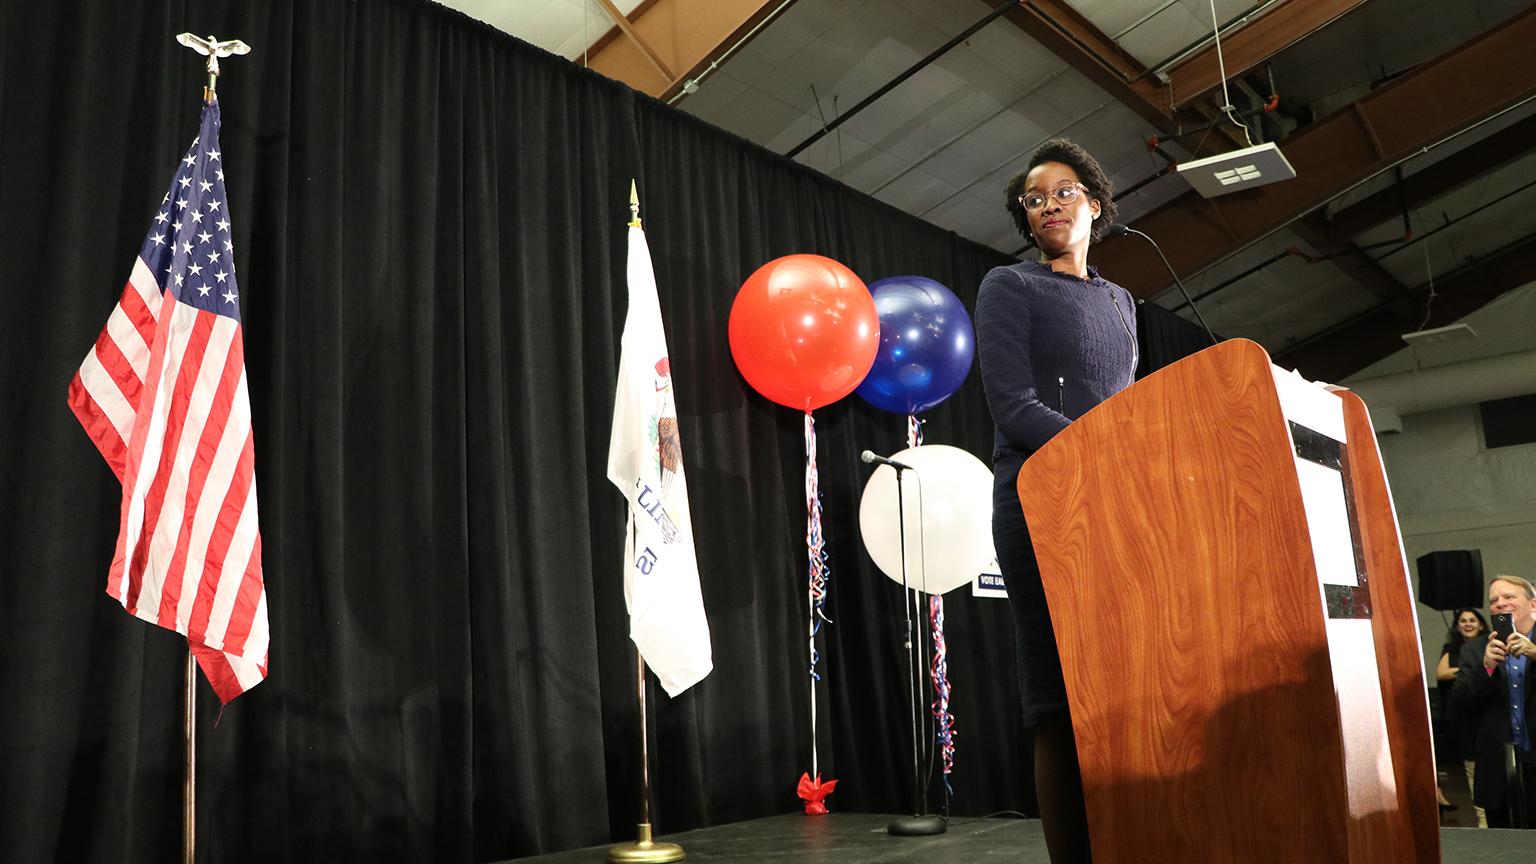 Lauren Underwood gives her victory speech Tuesday, Nov. 6 after winning the election for Illinois’ 14th Congressional District.  (Evan Garcia / Chicago Tonight)